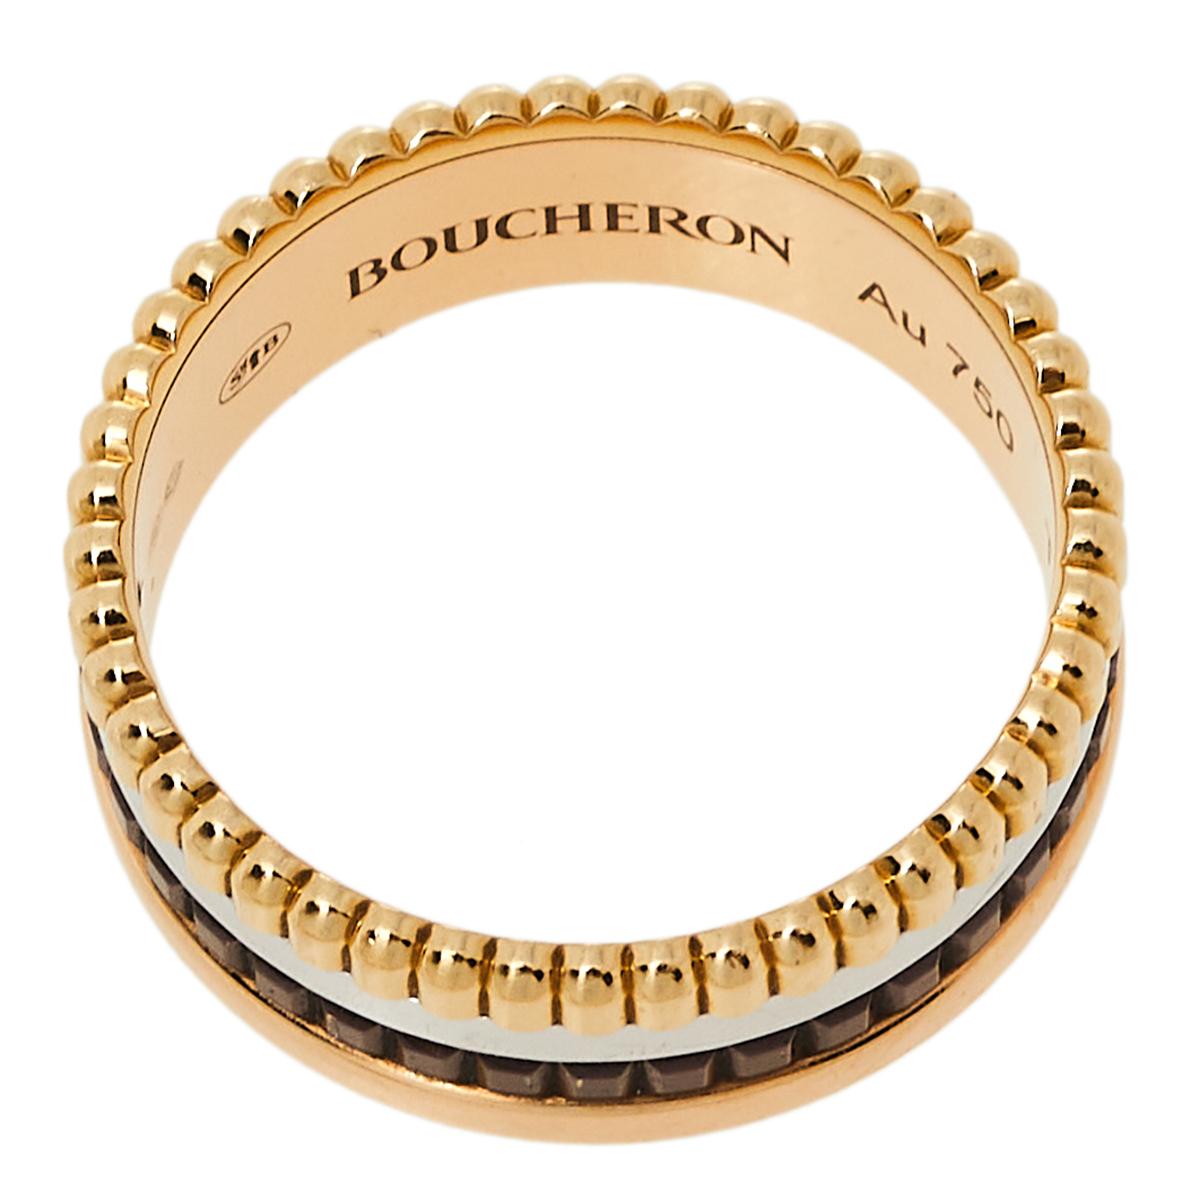 Boucheron's Quatre collection beautifully presents the spirit of the brand, exemplifying craftsmanship, and an intricate play of textures and gold. The very collection blesses you with this ring arranged preciously in 18k three-tone gold, and brown